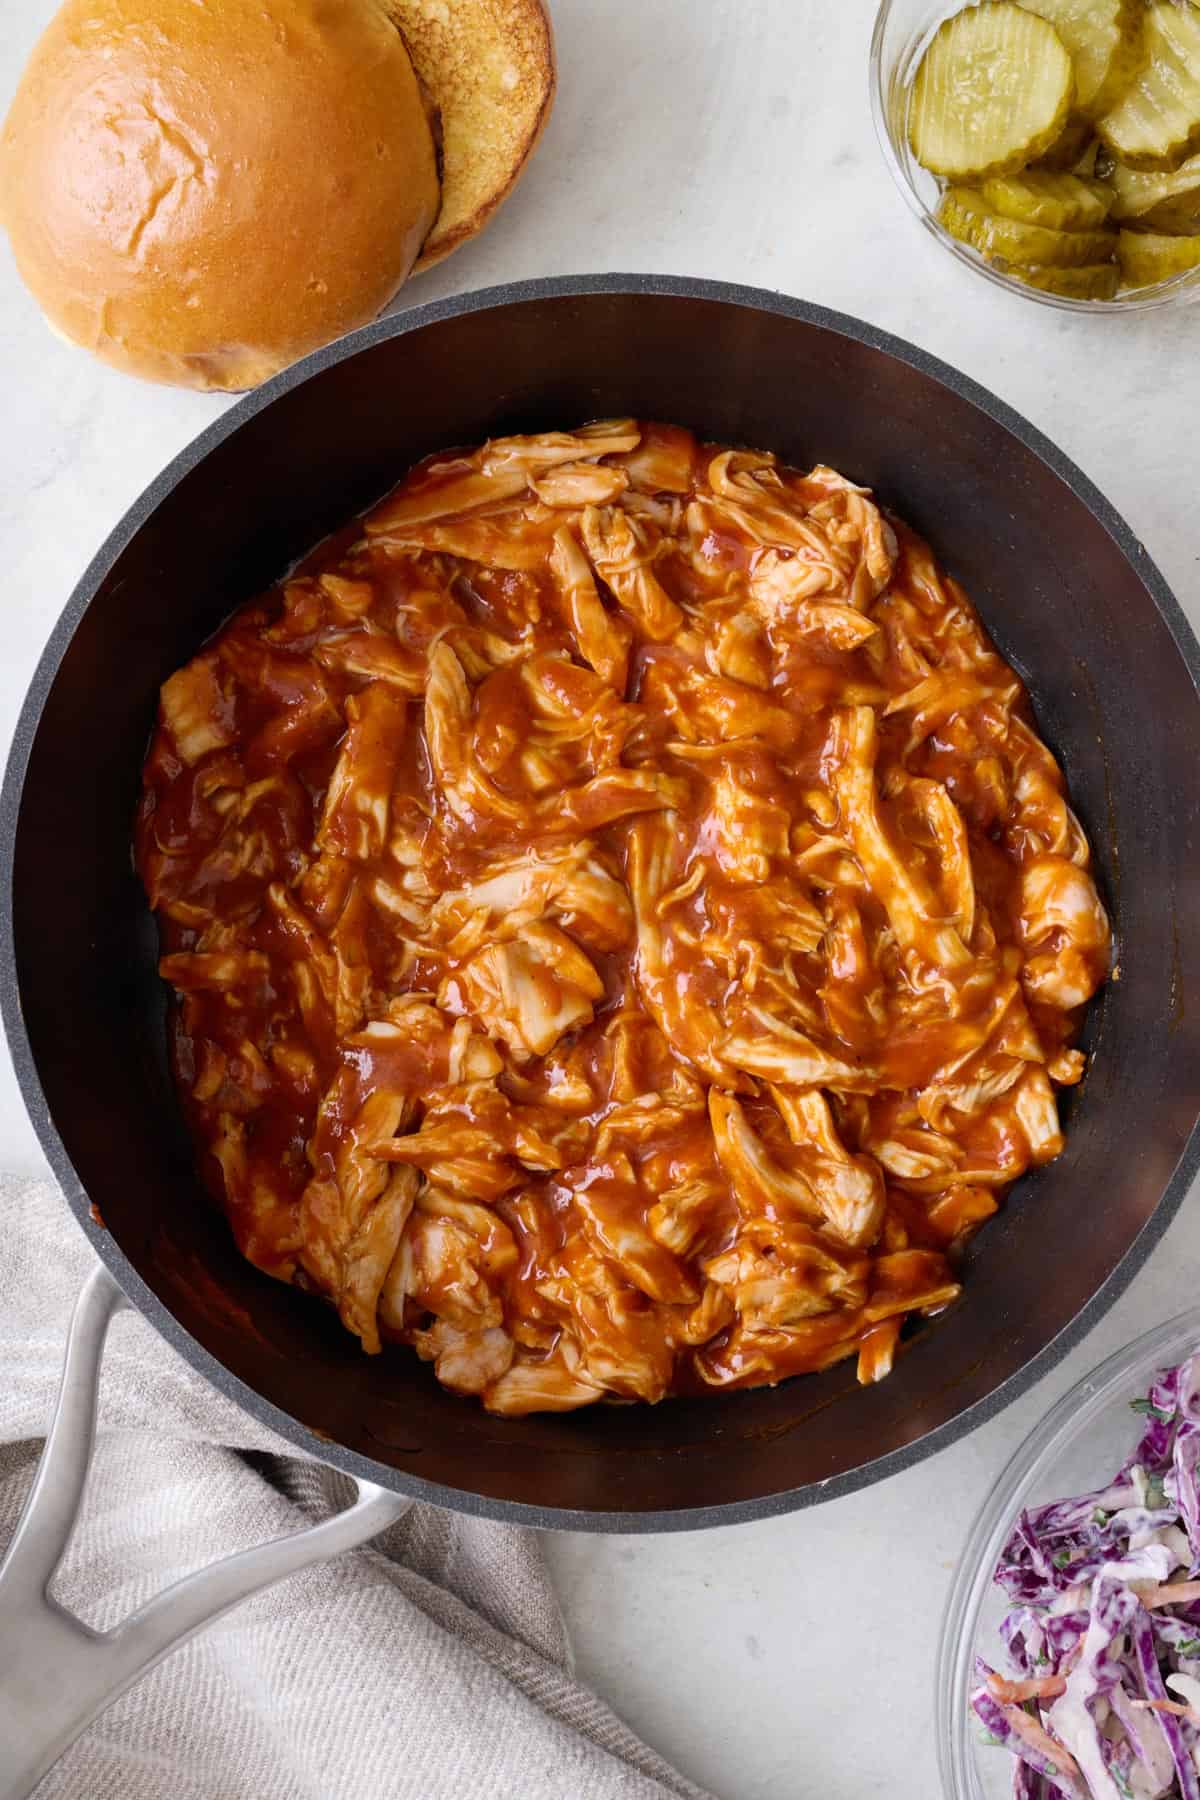 Shredded bbq chicken in a pot for sandwiches.